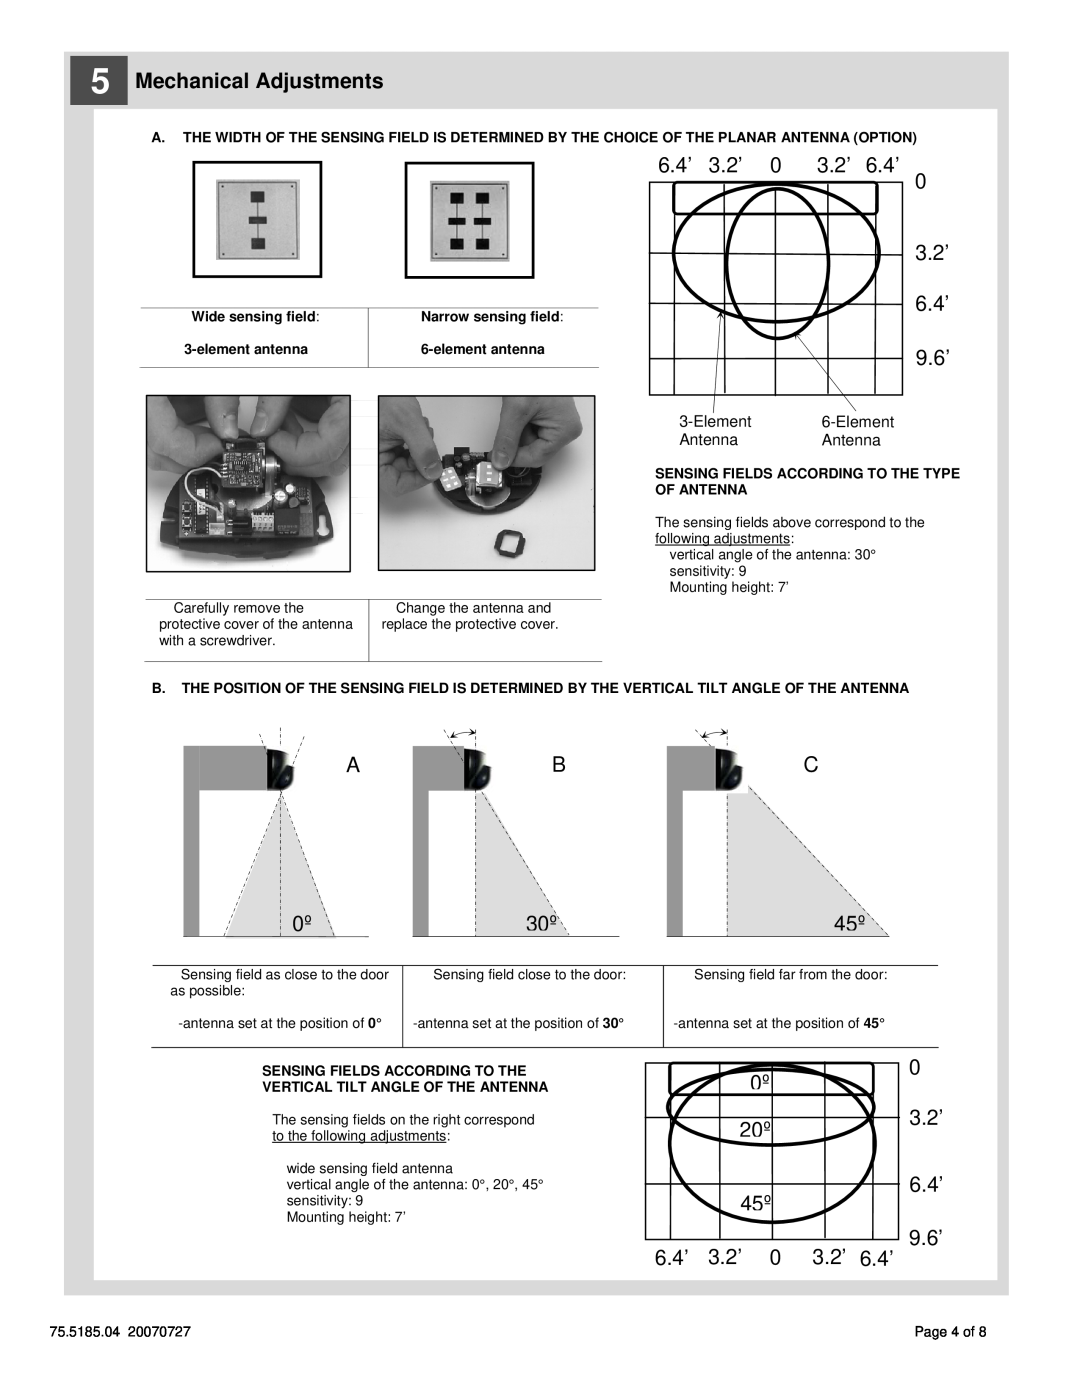 BEA 10 technical specifications Mechanical Adjustments, Element 6-Element Antenna Antenna 